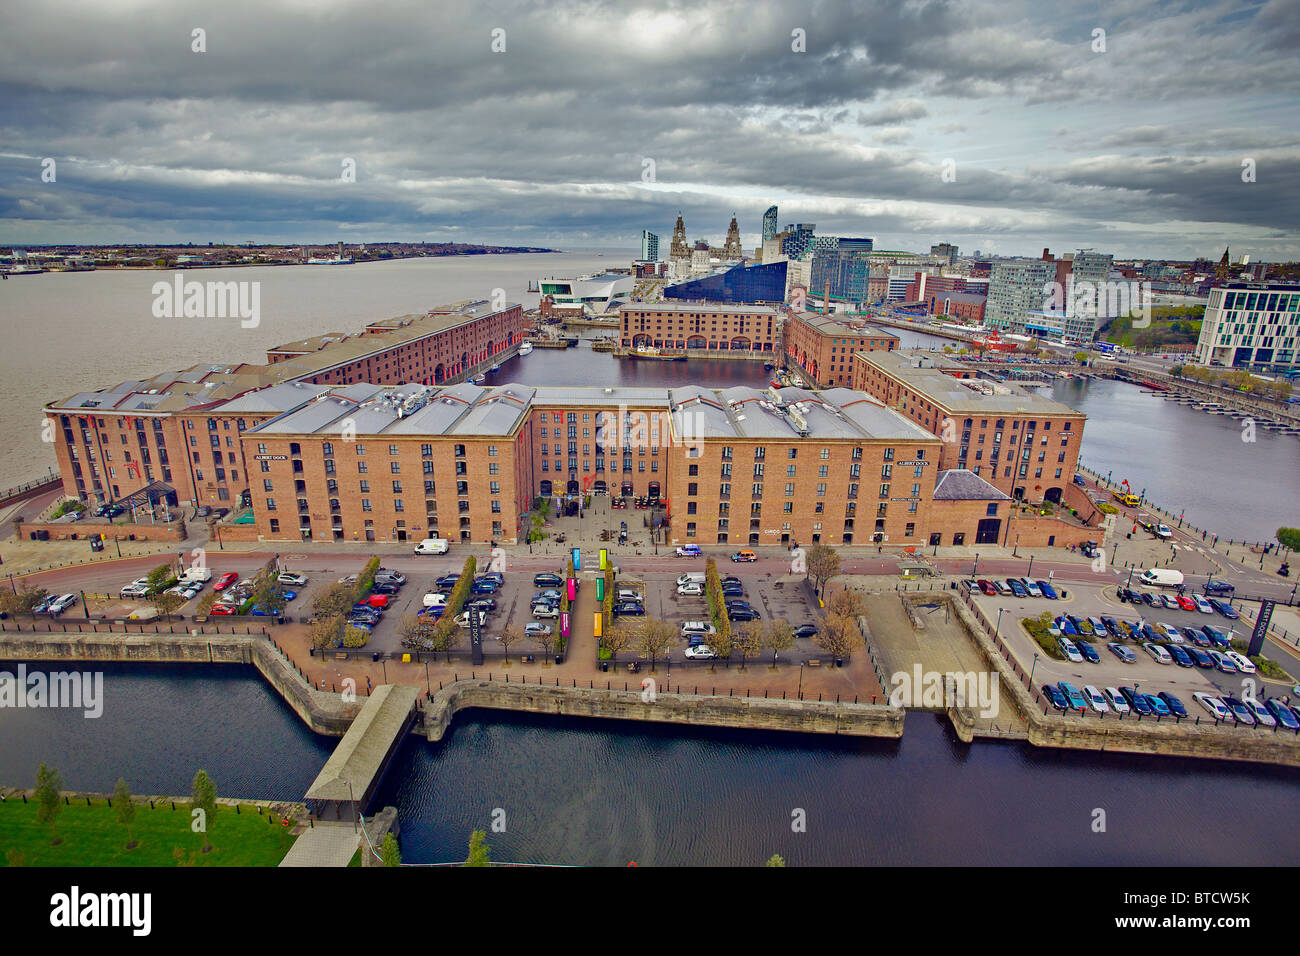 The Albert Dock building sand the river Mersey seen from an aerial position looking north towards the sea. Stock Photo